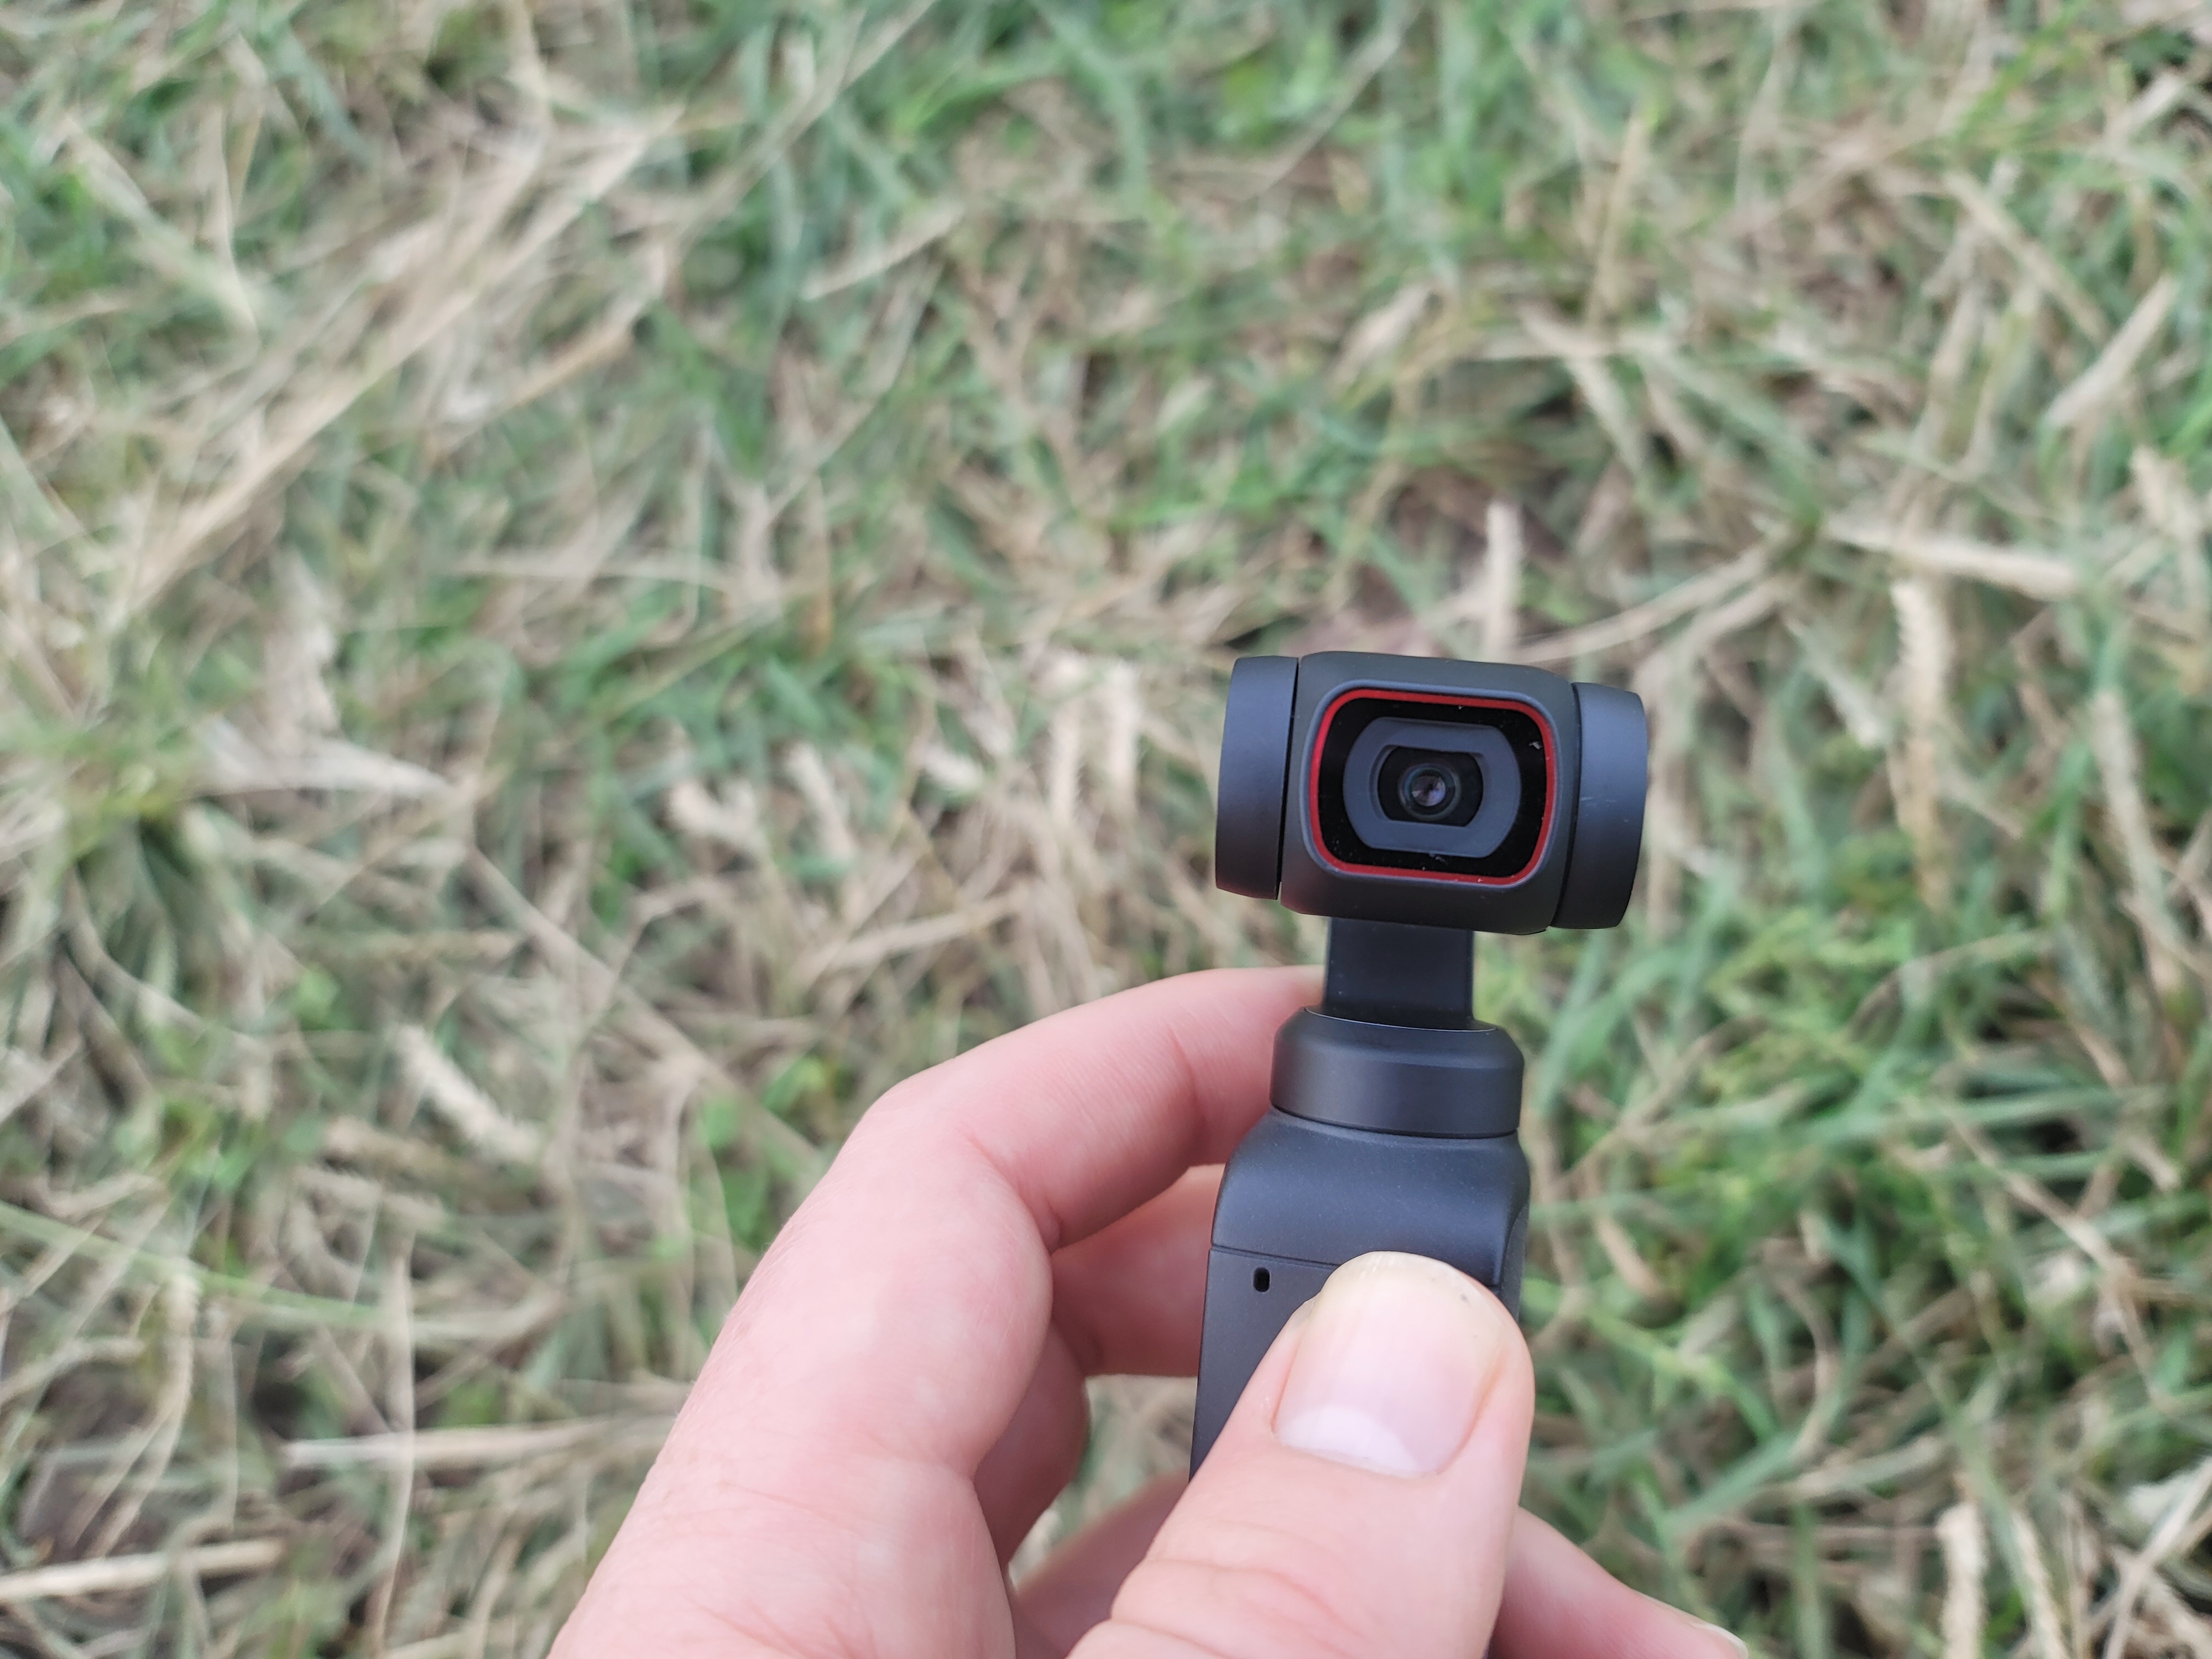 DJI's Pocket 2 gimbal is an extremely fun way to grab impressive